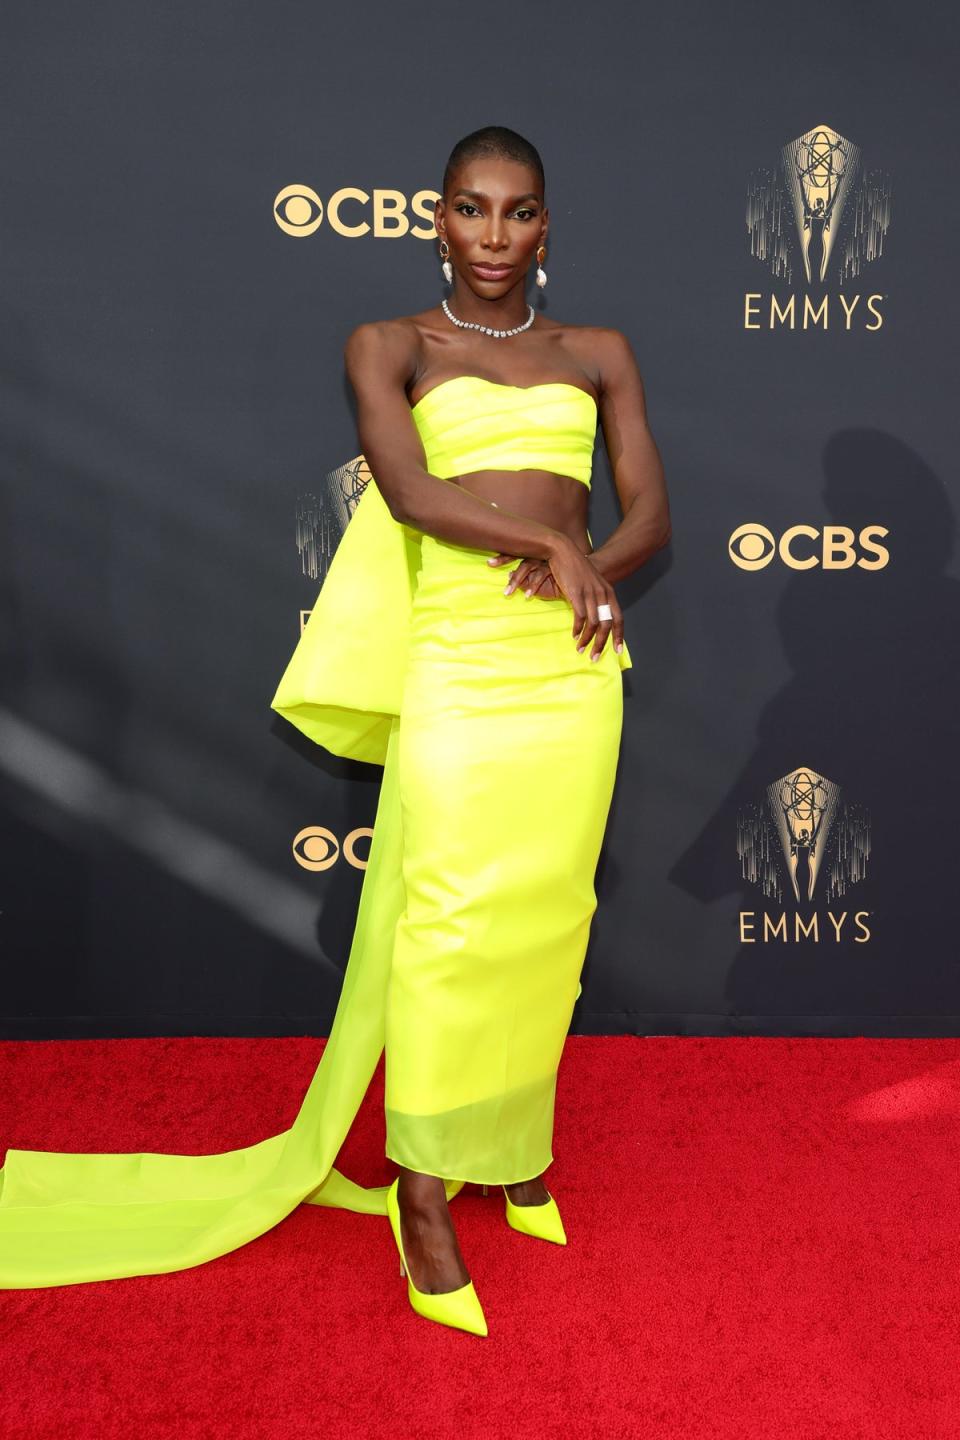 Michaeala Coel at the 2021 Emmy Awards (Getty Images)